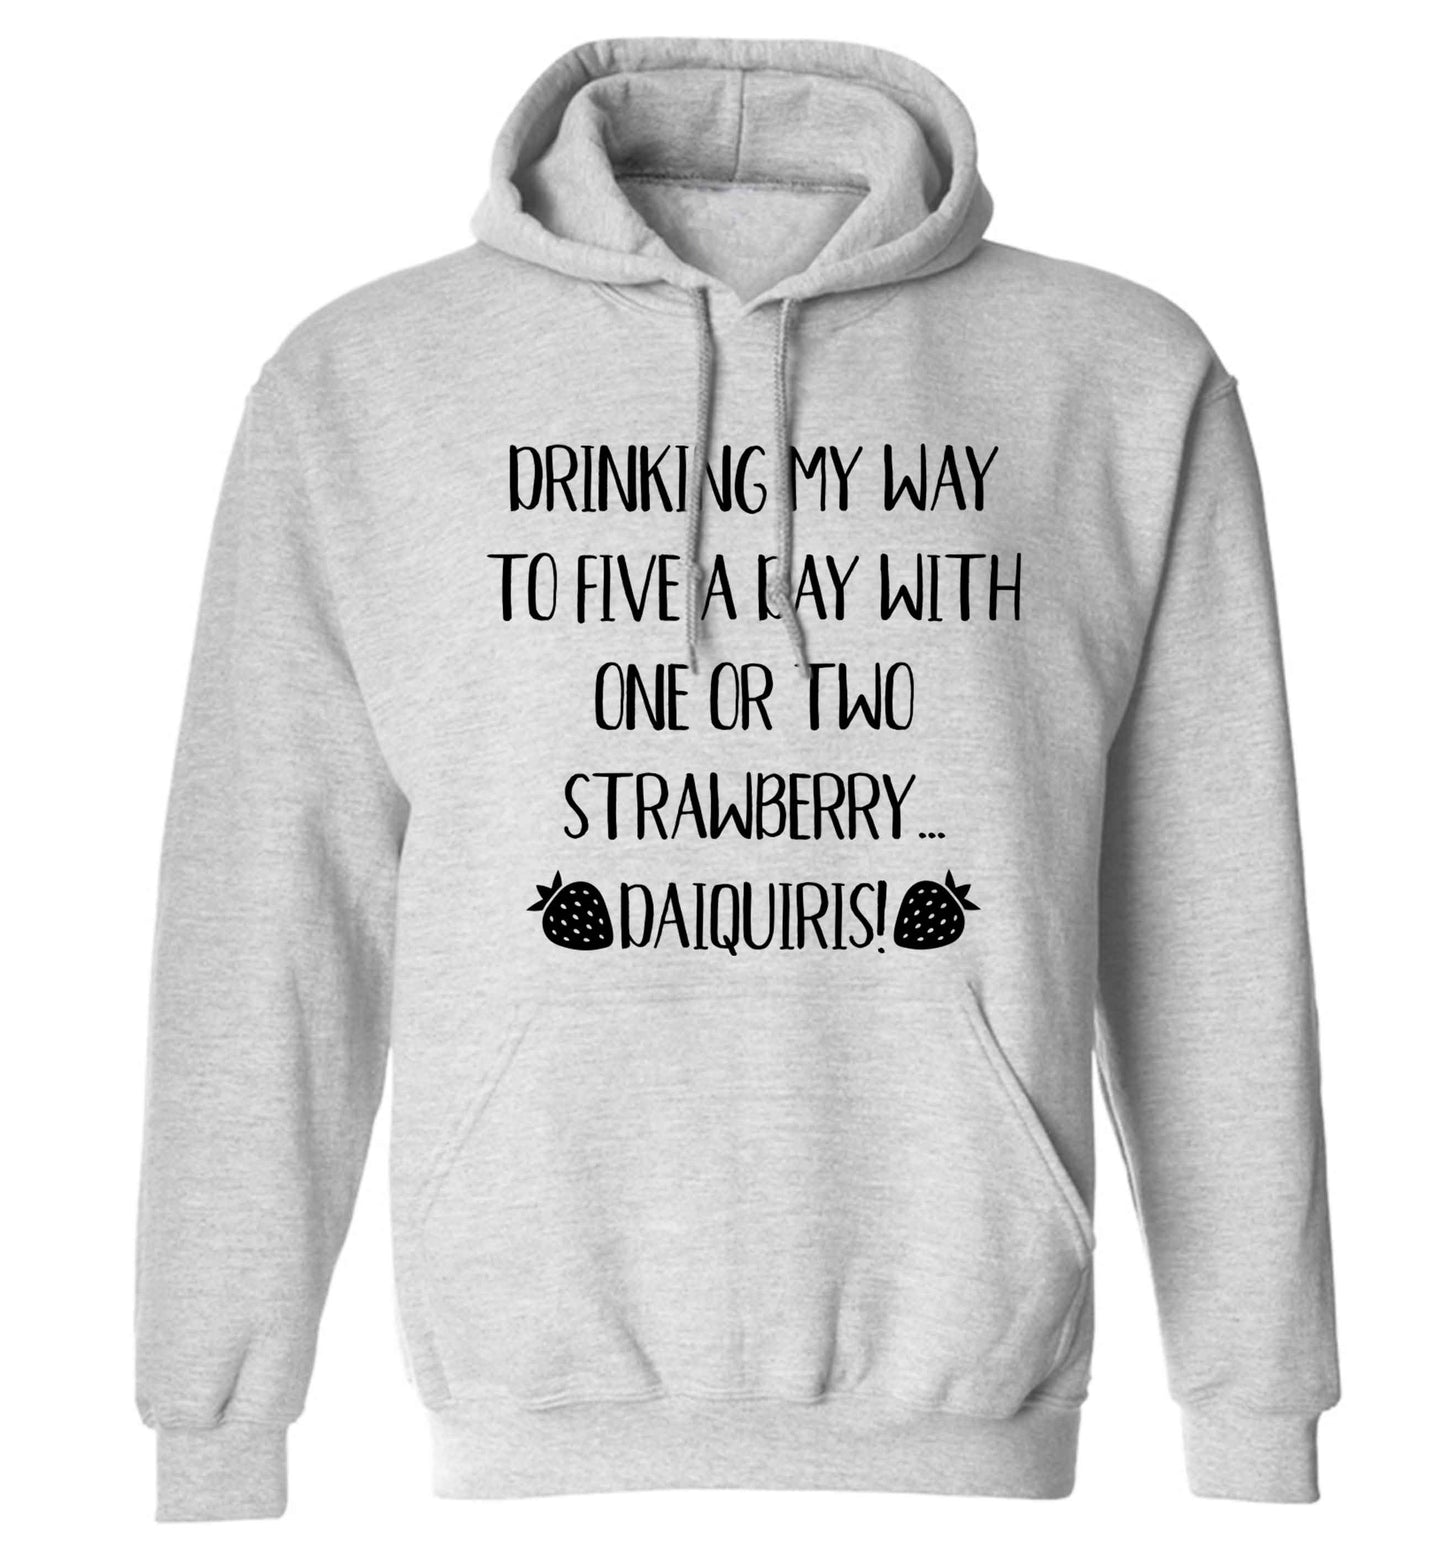 Drinking my way to five a day with one or two straberry daiquiris adults unisex grey hoodie 2XL